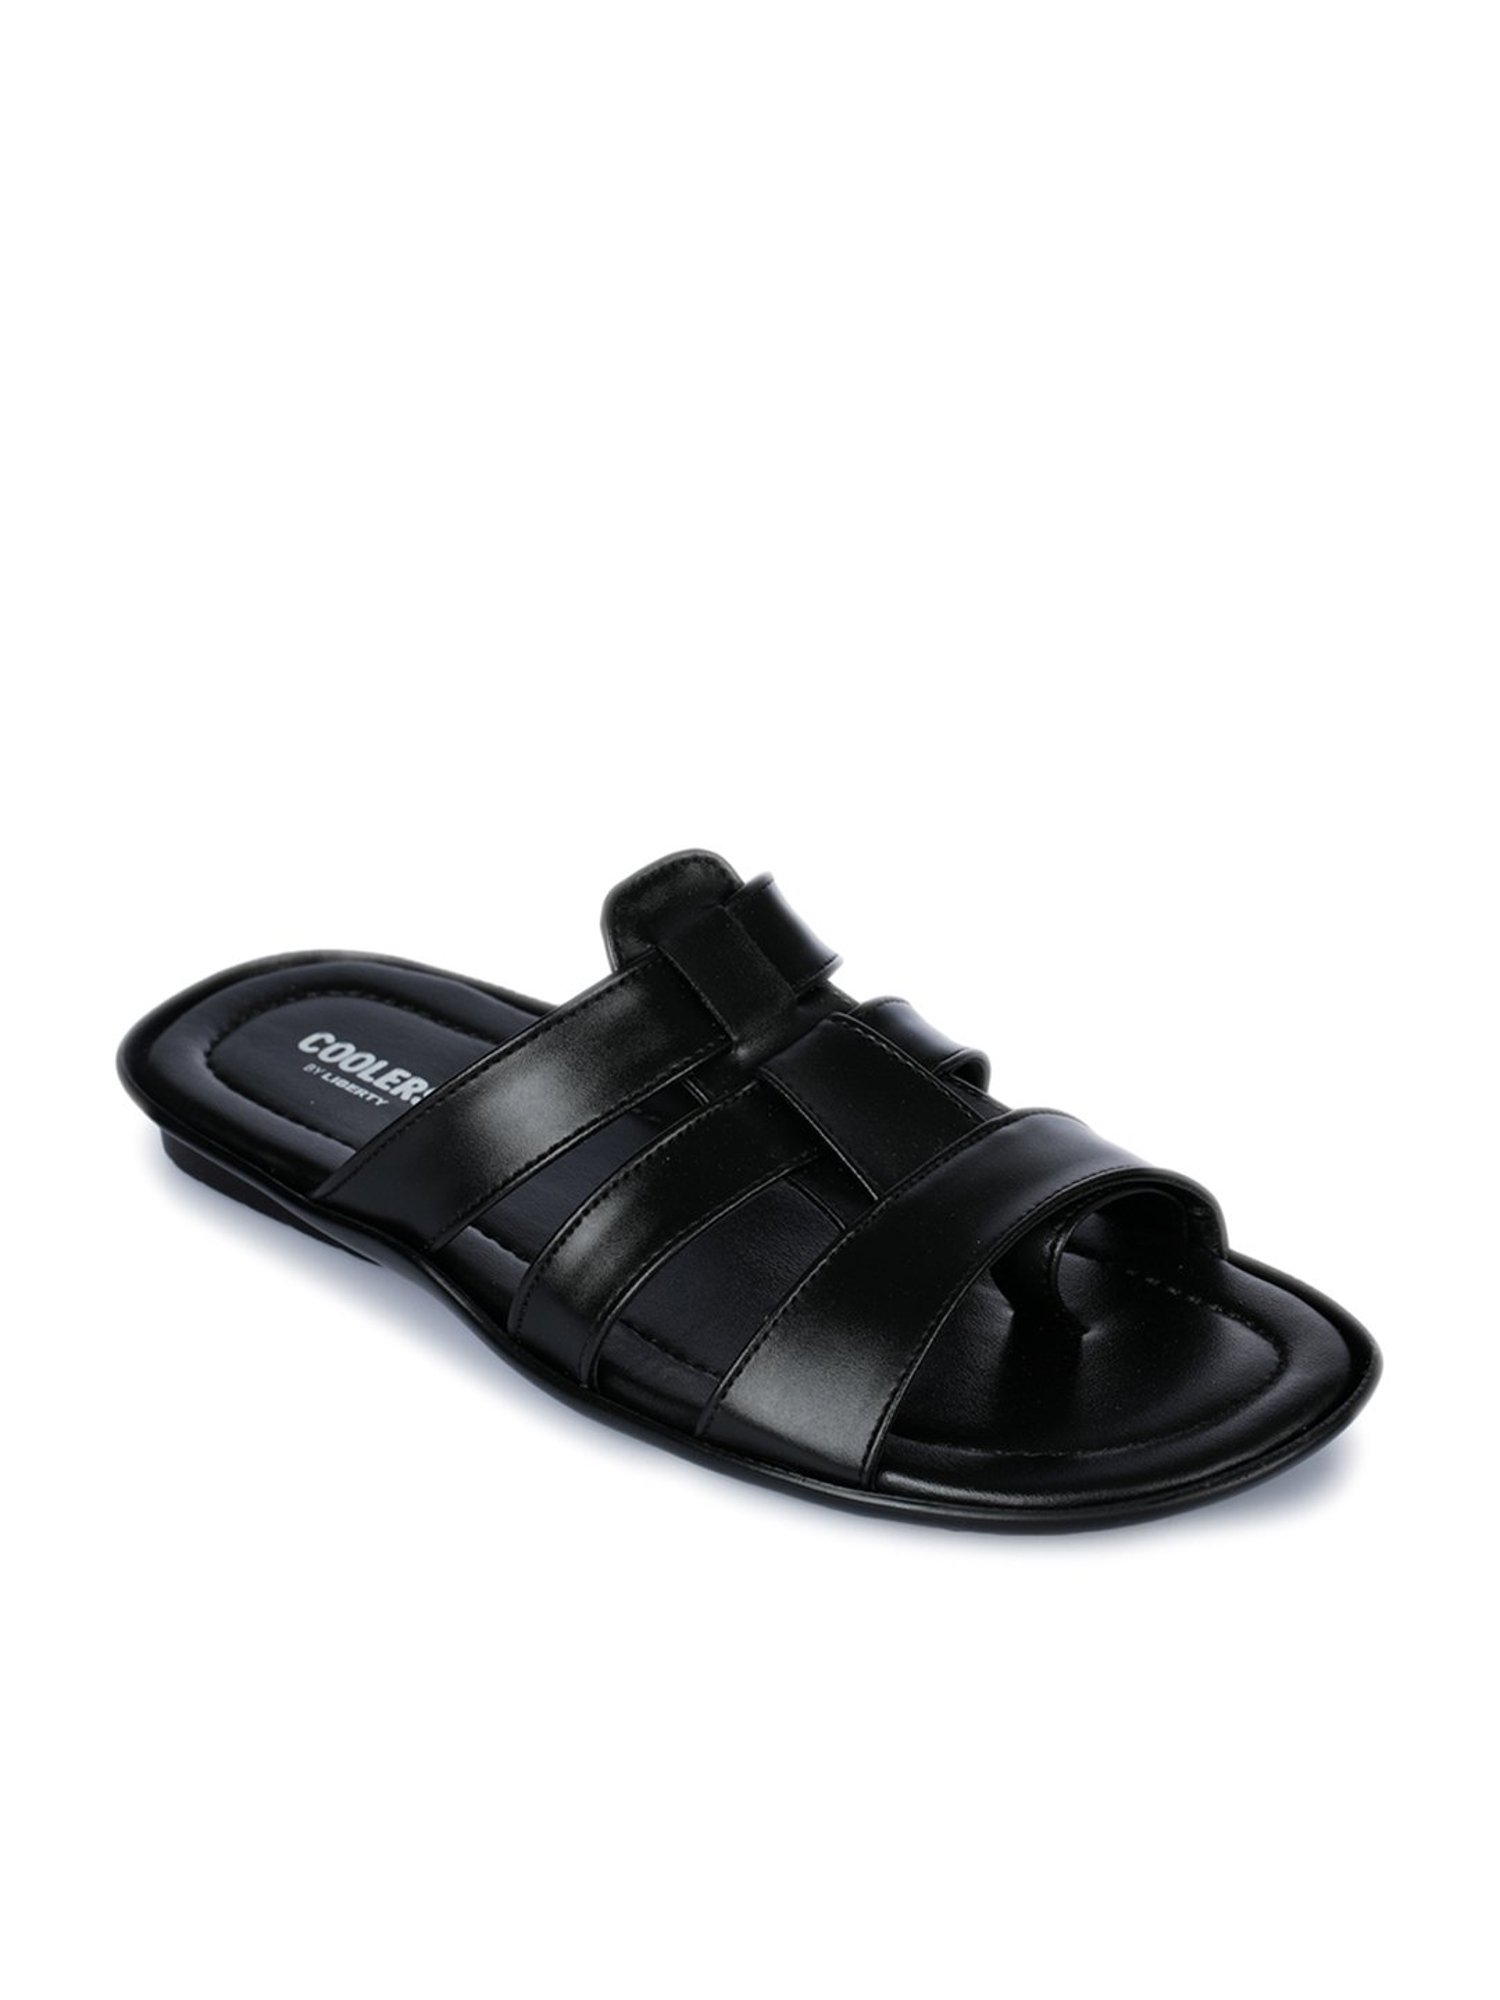 Buy Healers by Liberty Black Thong Sandals for Women at Best Price @ Tata  CLiQ